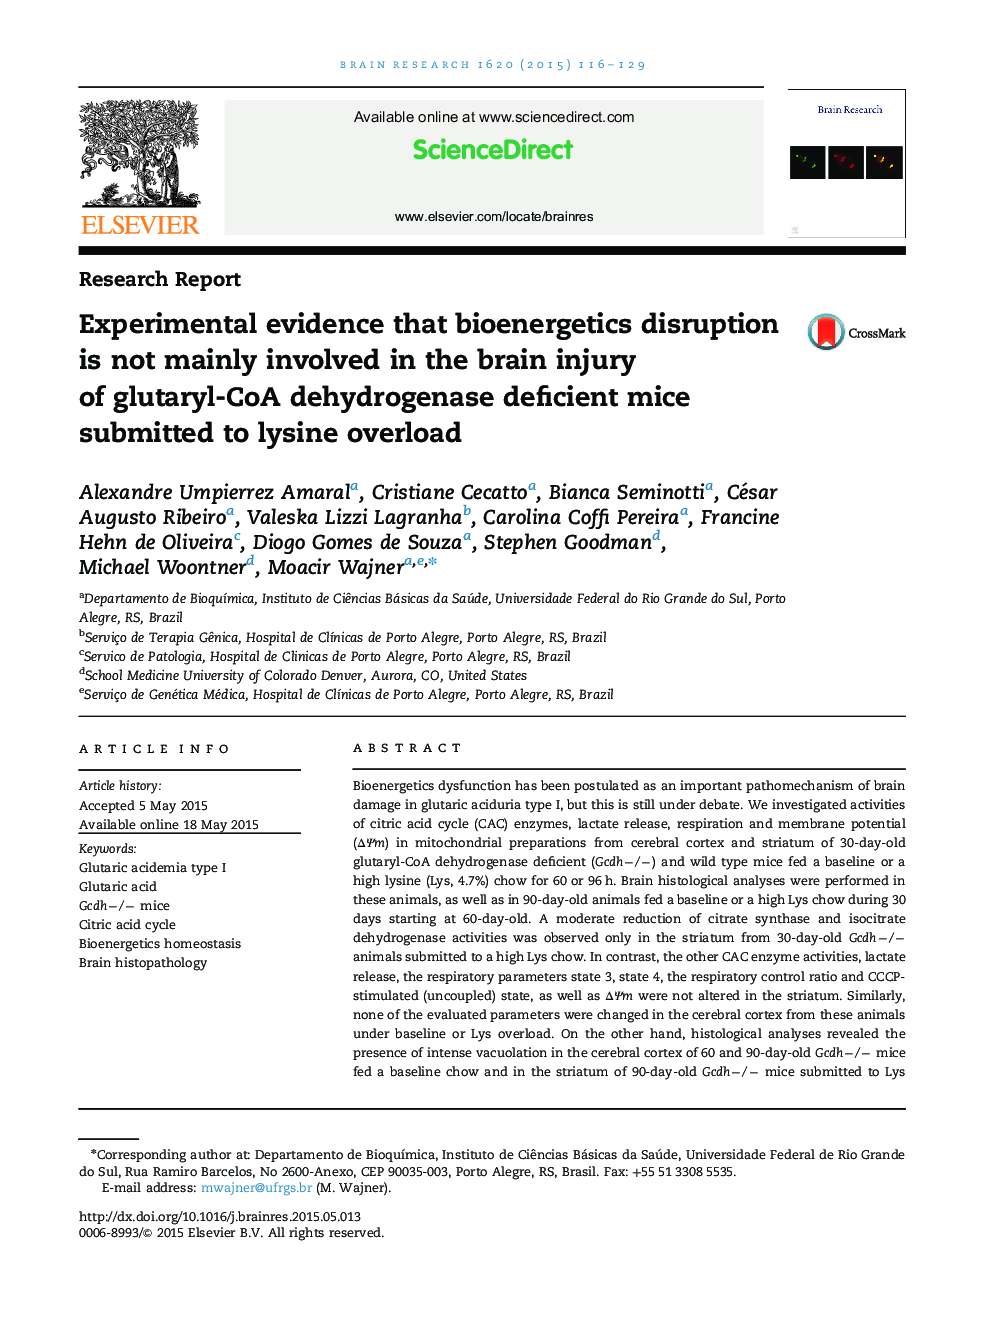 Research ReportExperimental evidence that bioenergetics disruption is not mainly involved in the brain injury of glutaryl-CoA dehydrogenase deficient mice submitted to lysine overload